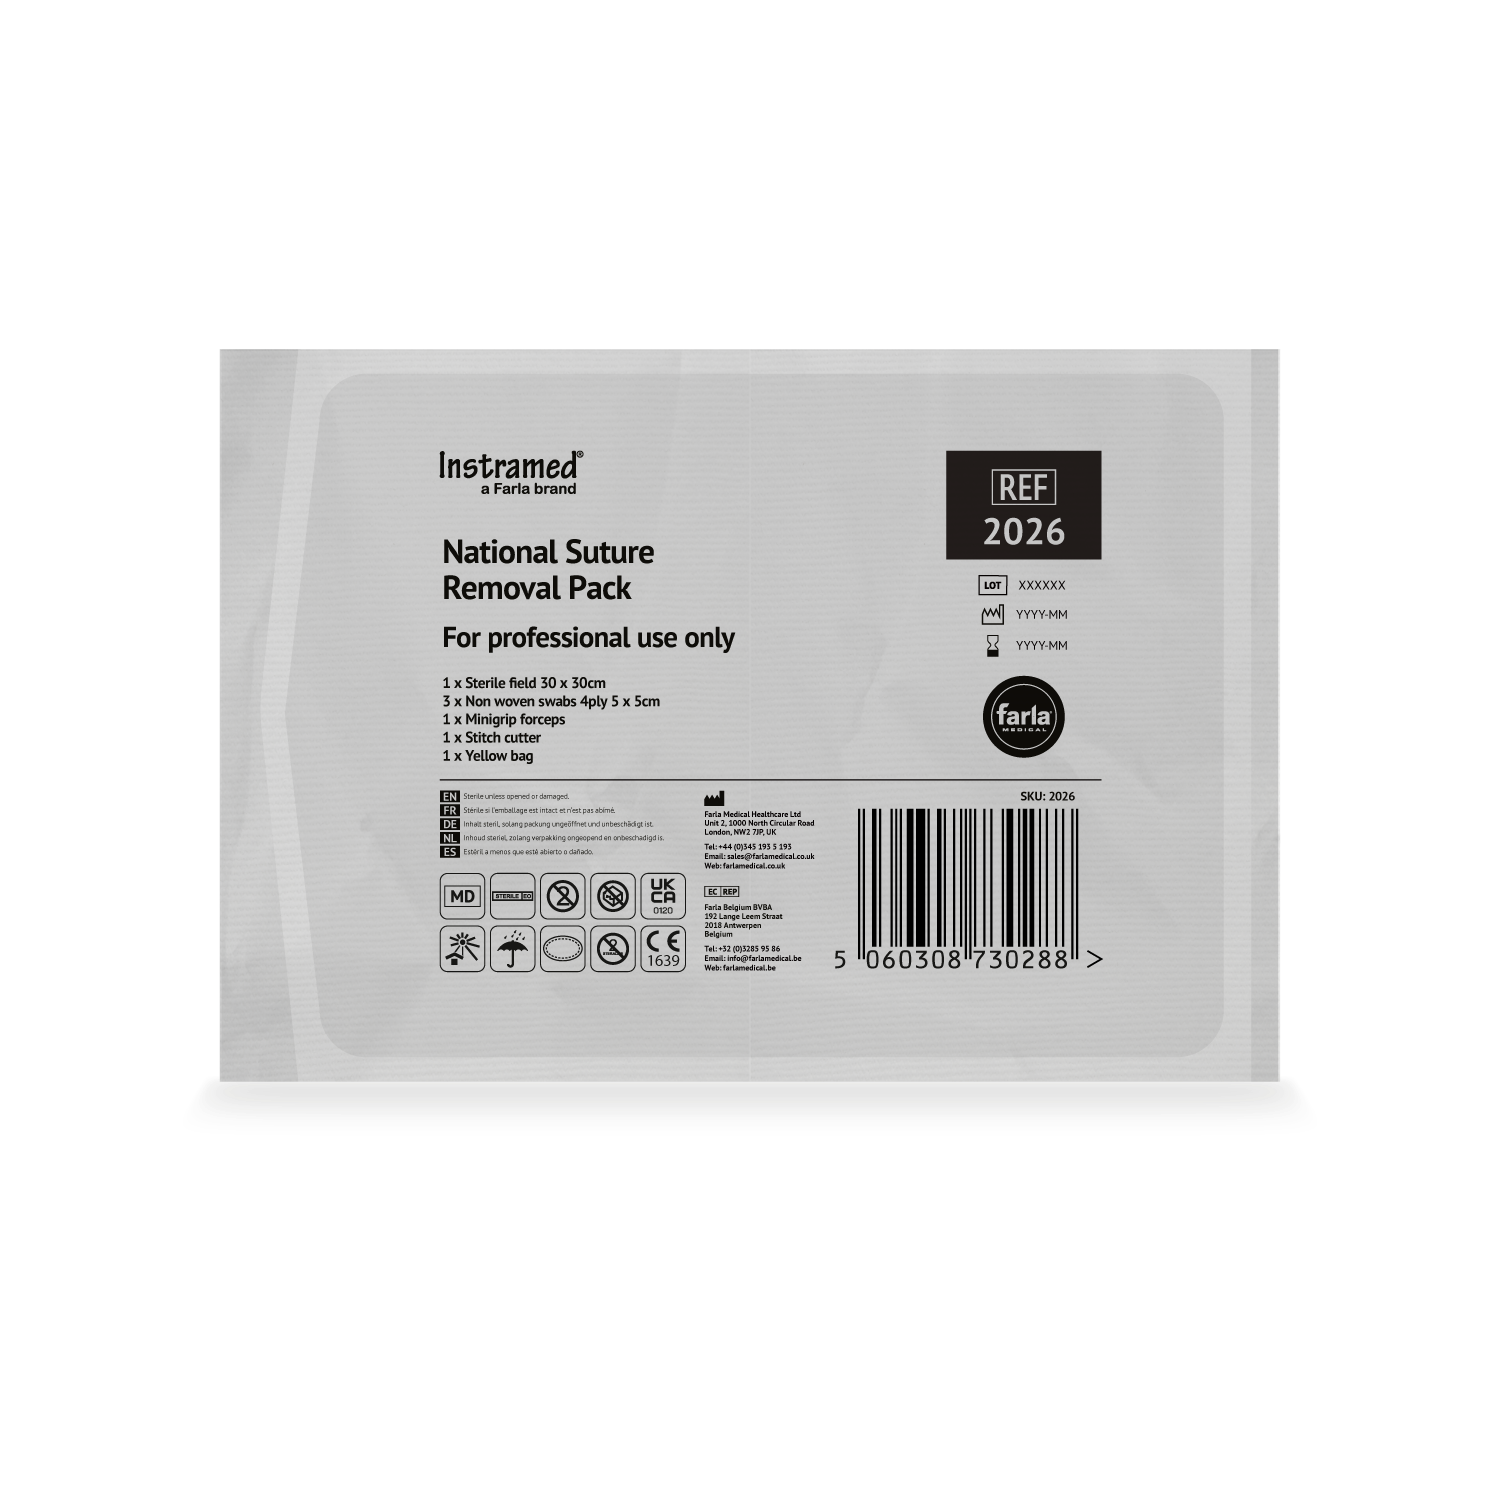 Instramed National Suture Removal Pack (1)